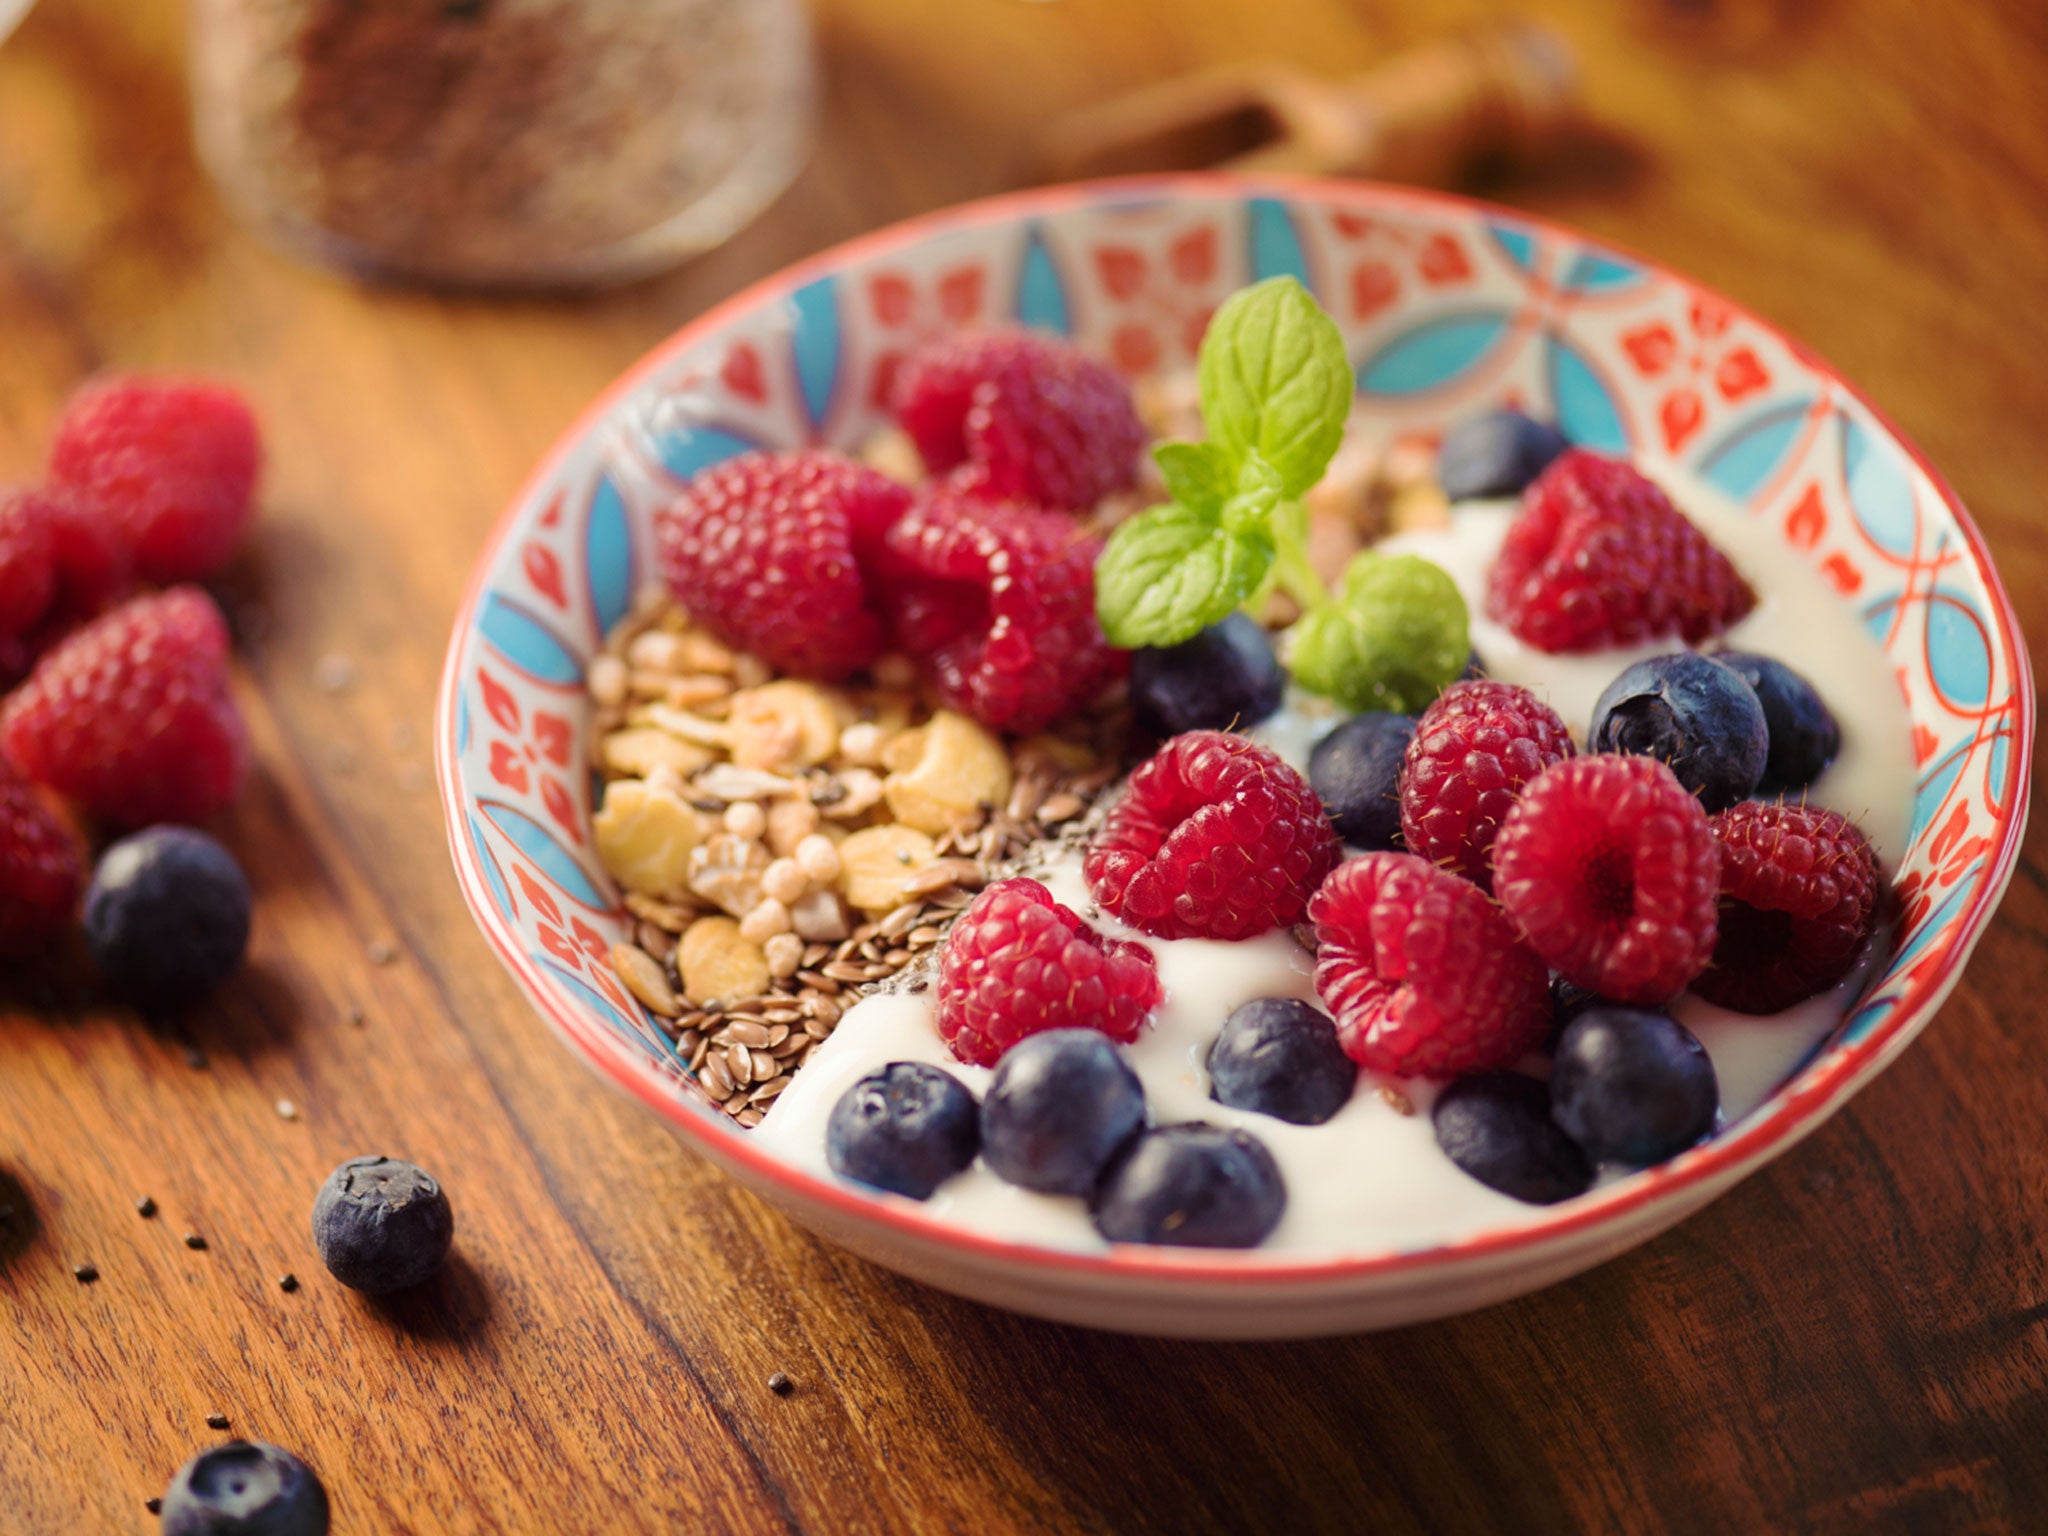 Low-sugar wholemeal cereal with fruit is a healthy option for breakfast